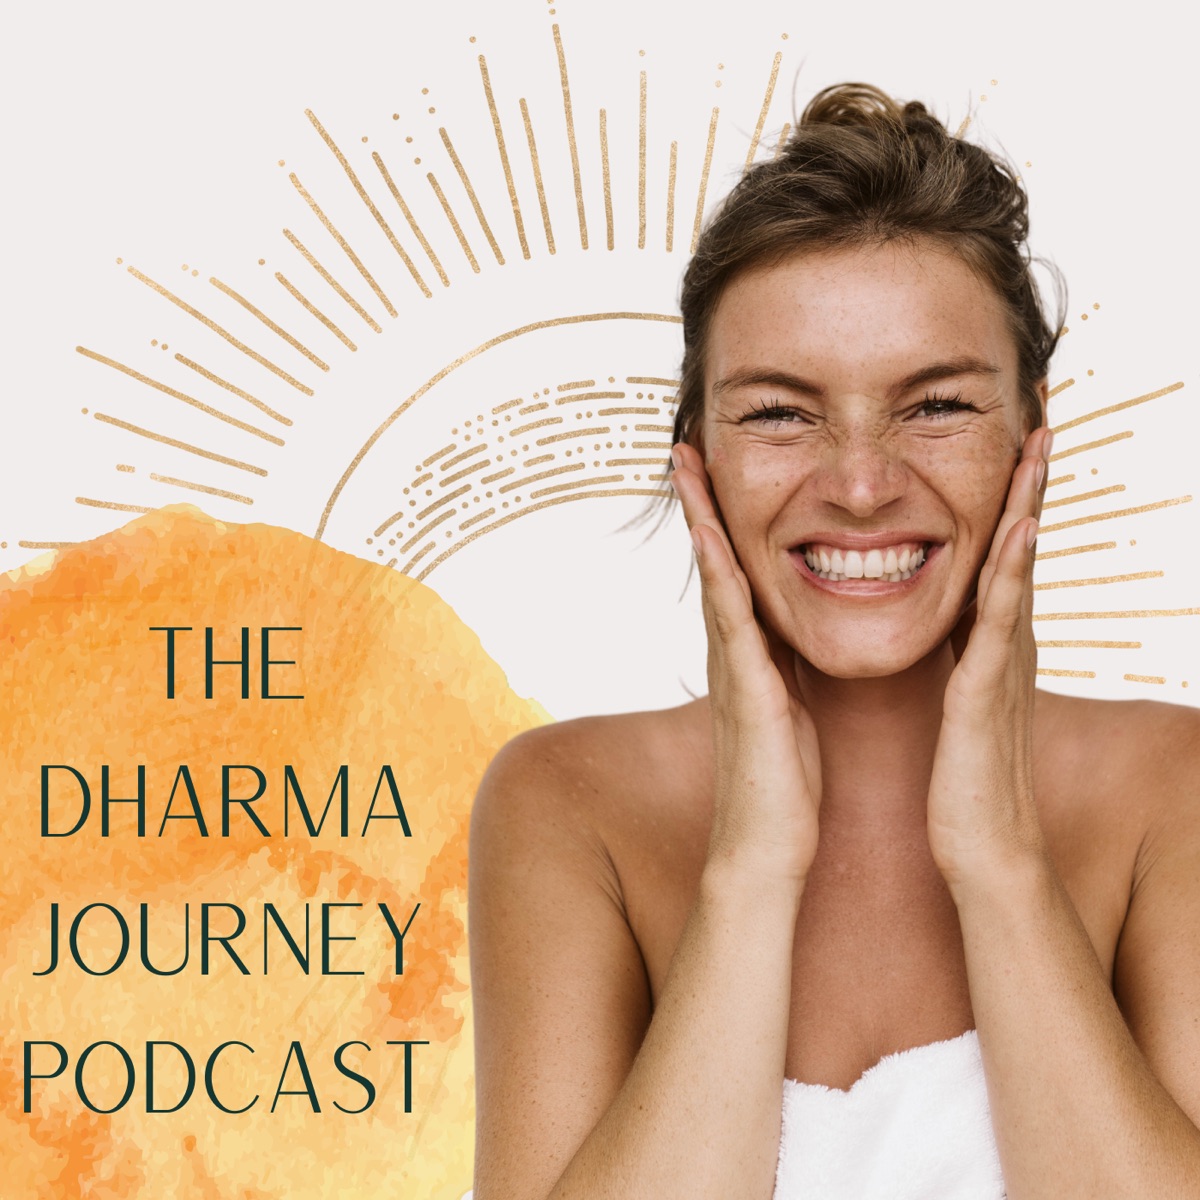 The Dharma Journey Podcast